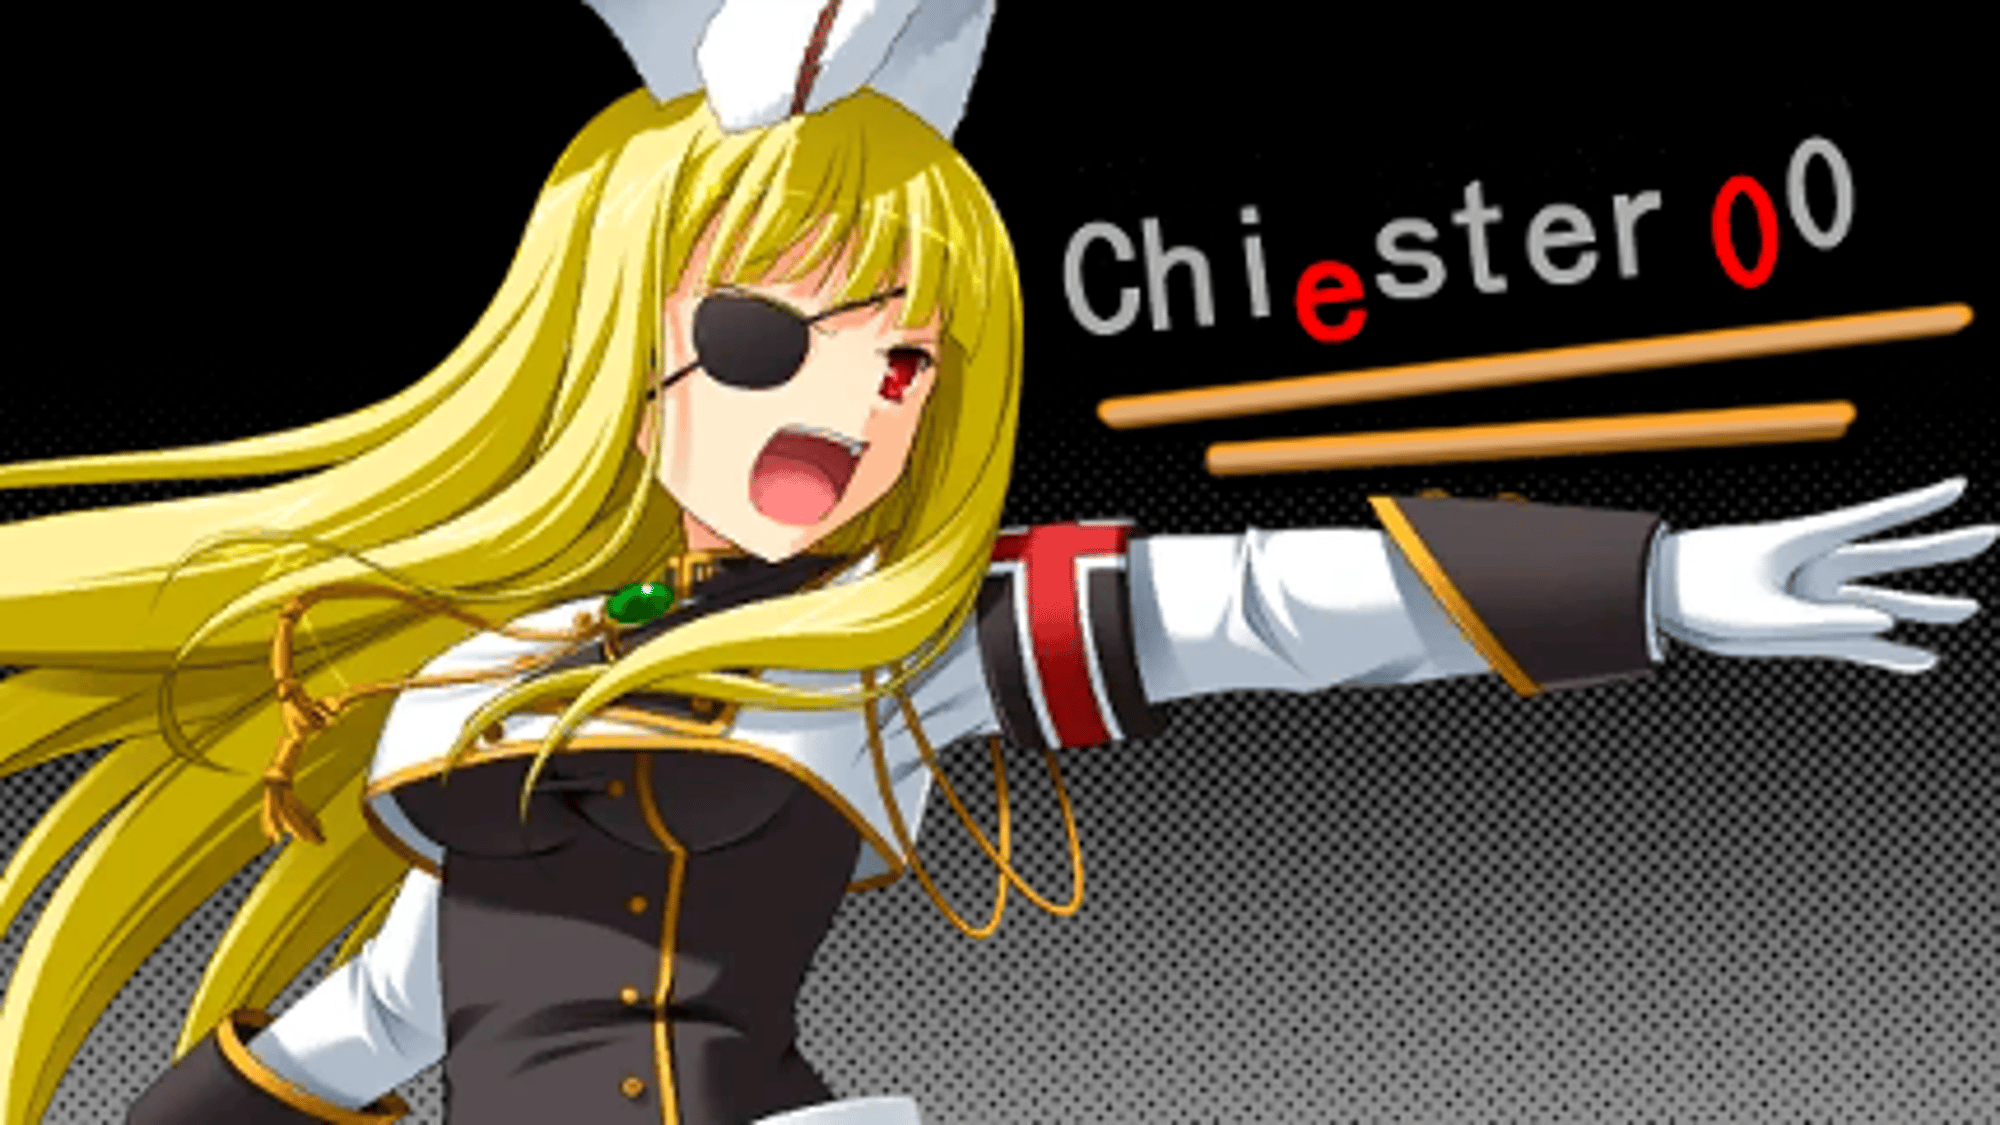 Chiester 00